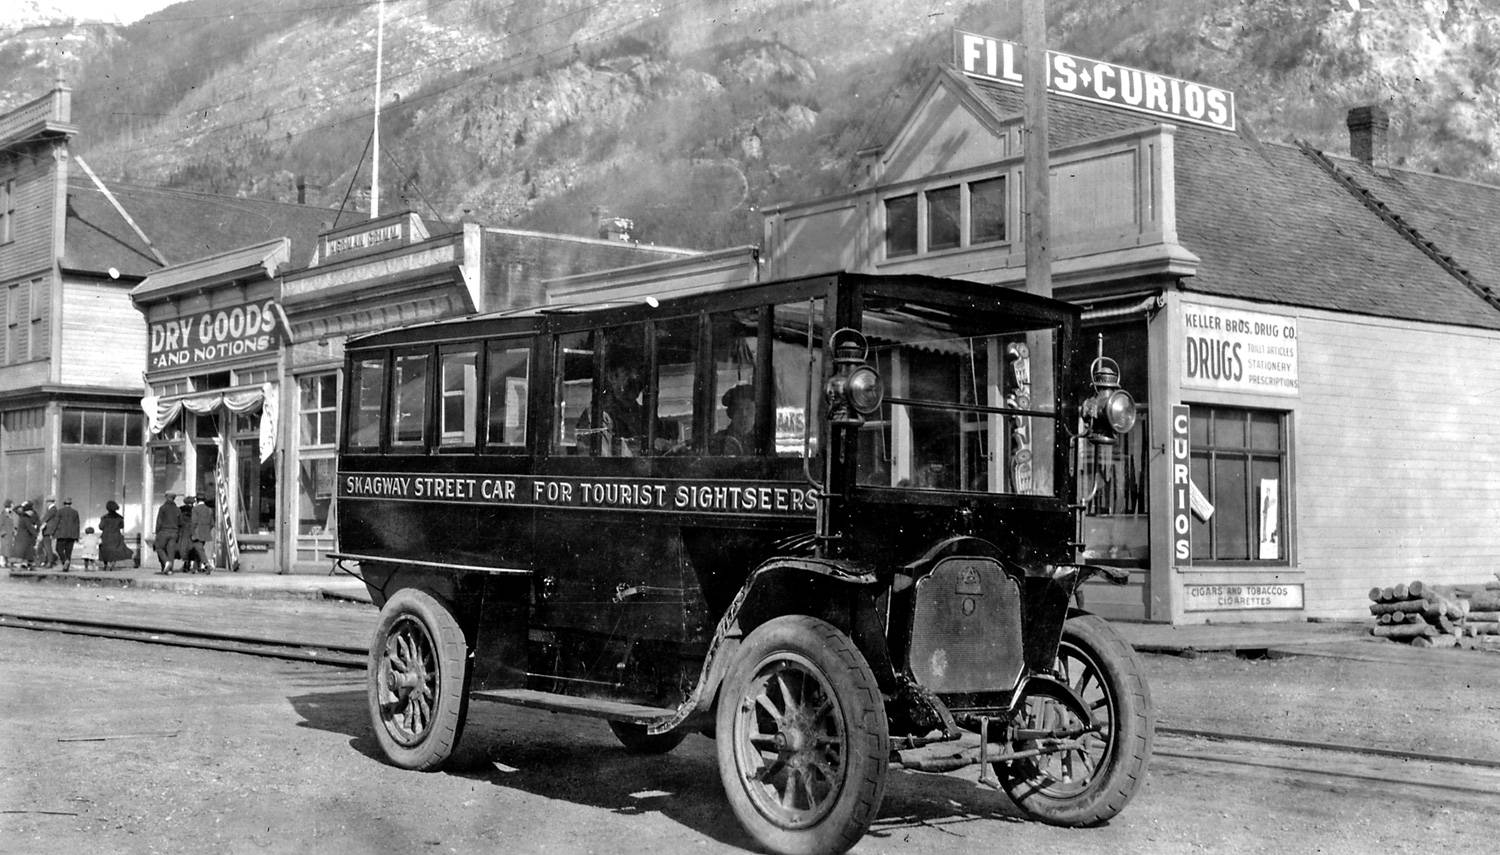 Martin Itjen’s second street car built on the intersection of Broadway and 3rd Avenue. Image courtesy of the Klondike Gold Rush National Historical Park, from the George & Edna Rapuzzi Collection, KLGO 55911.